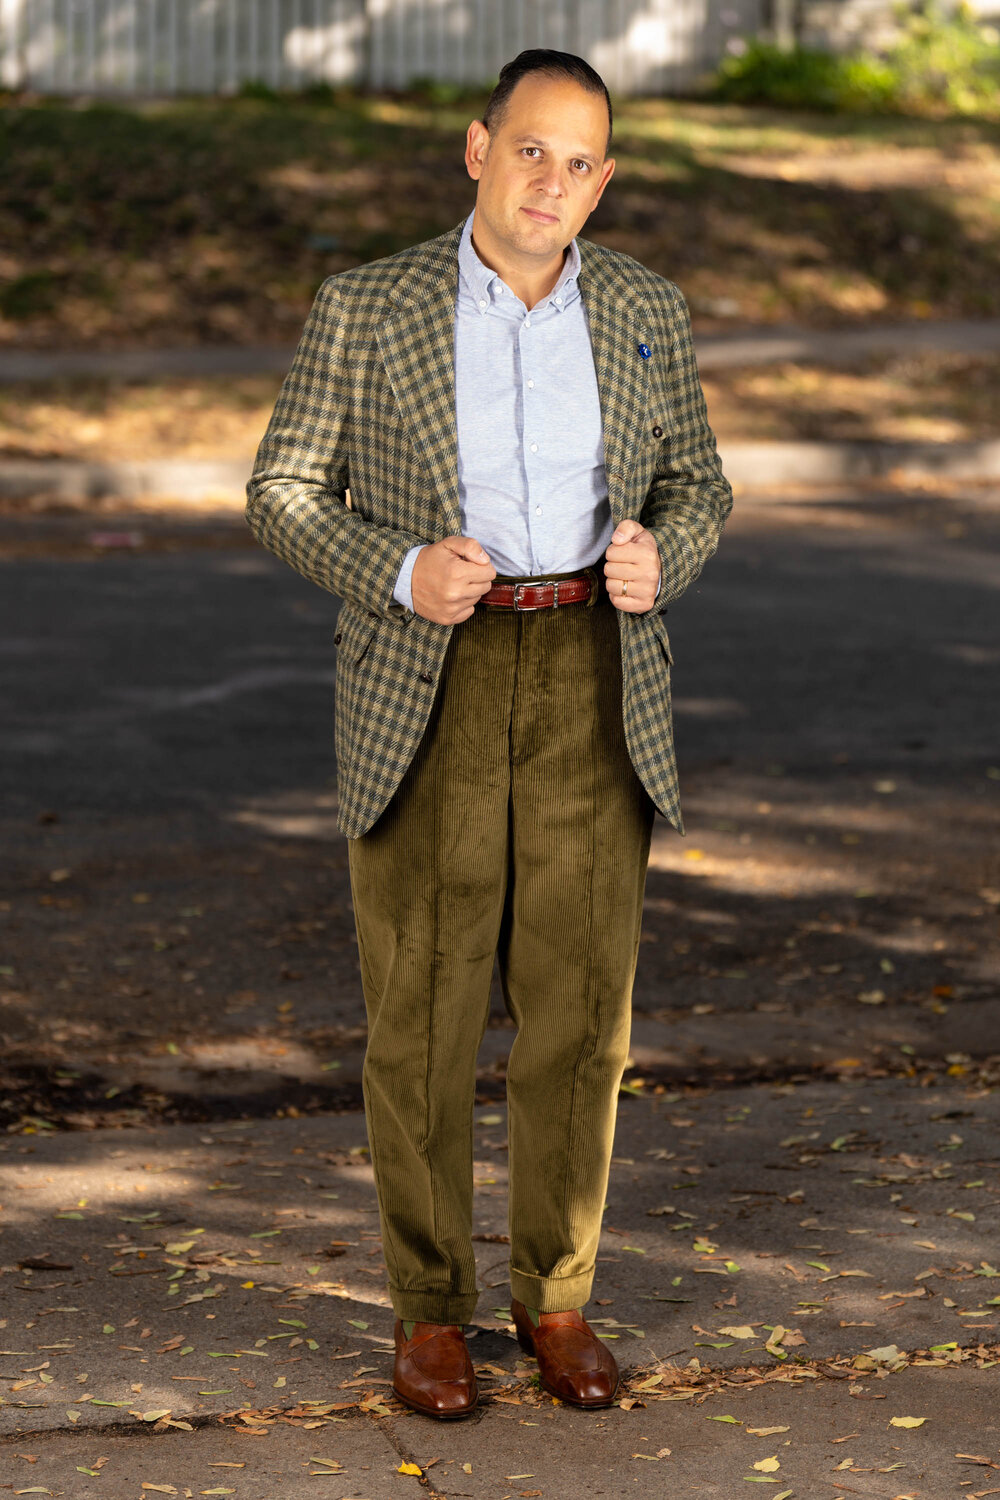 Raphael wearing a checked jacket paired with the khaki drab corduroy trousers.